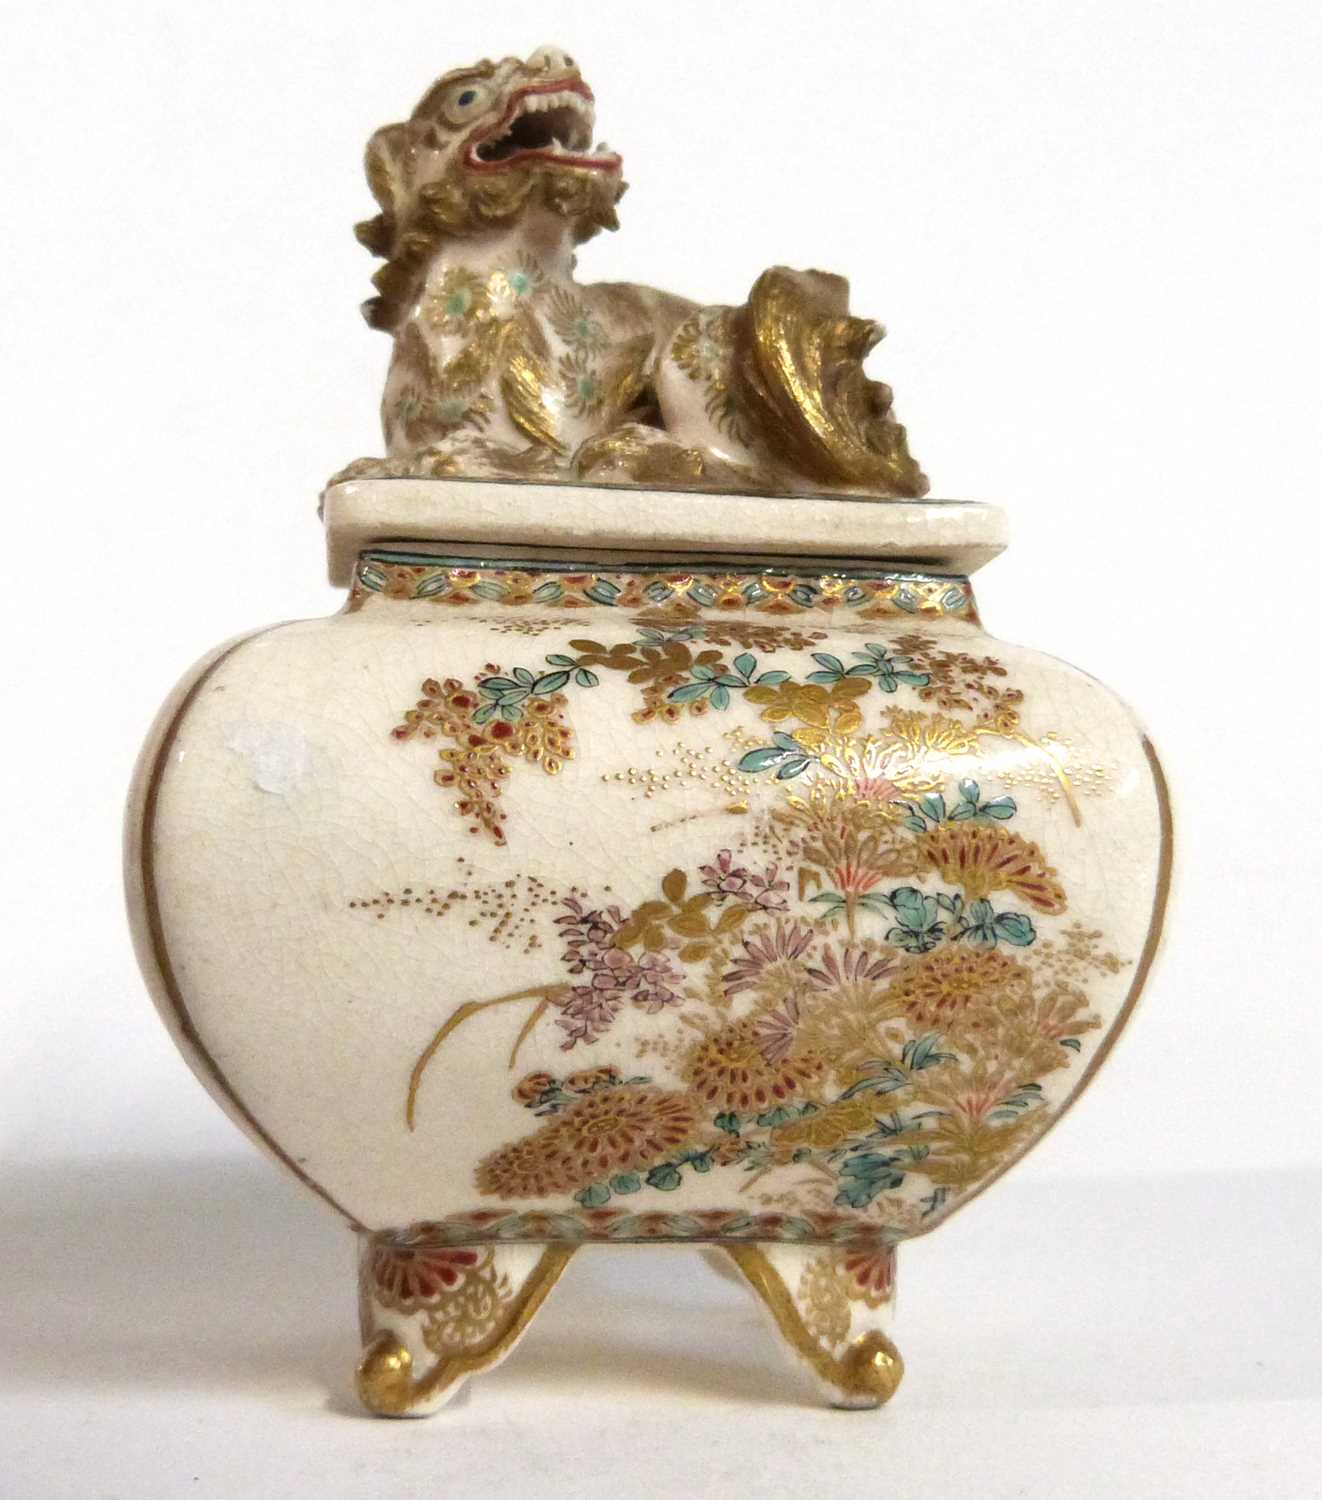 Japanese Satsuma small jar of quatrelobe form, the cover decorated with a dragon finial - Image 5 of 8